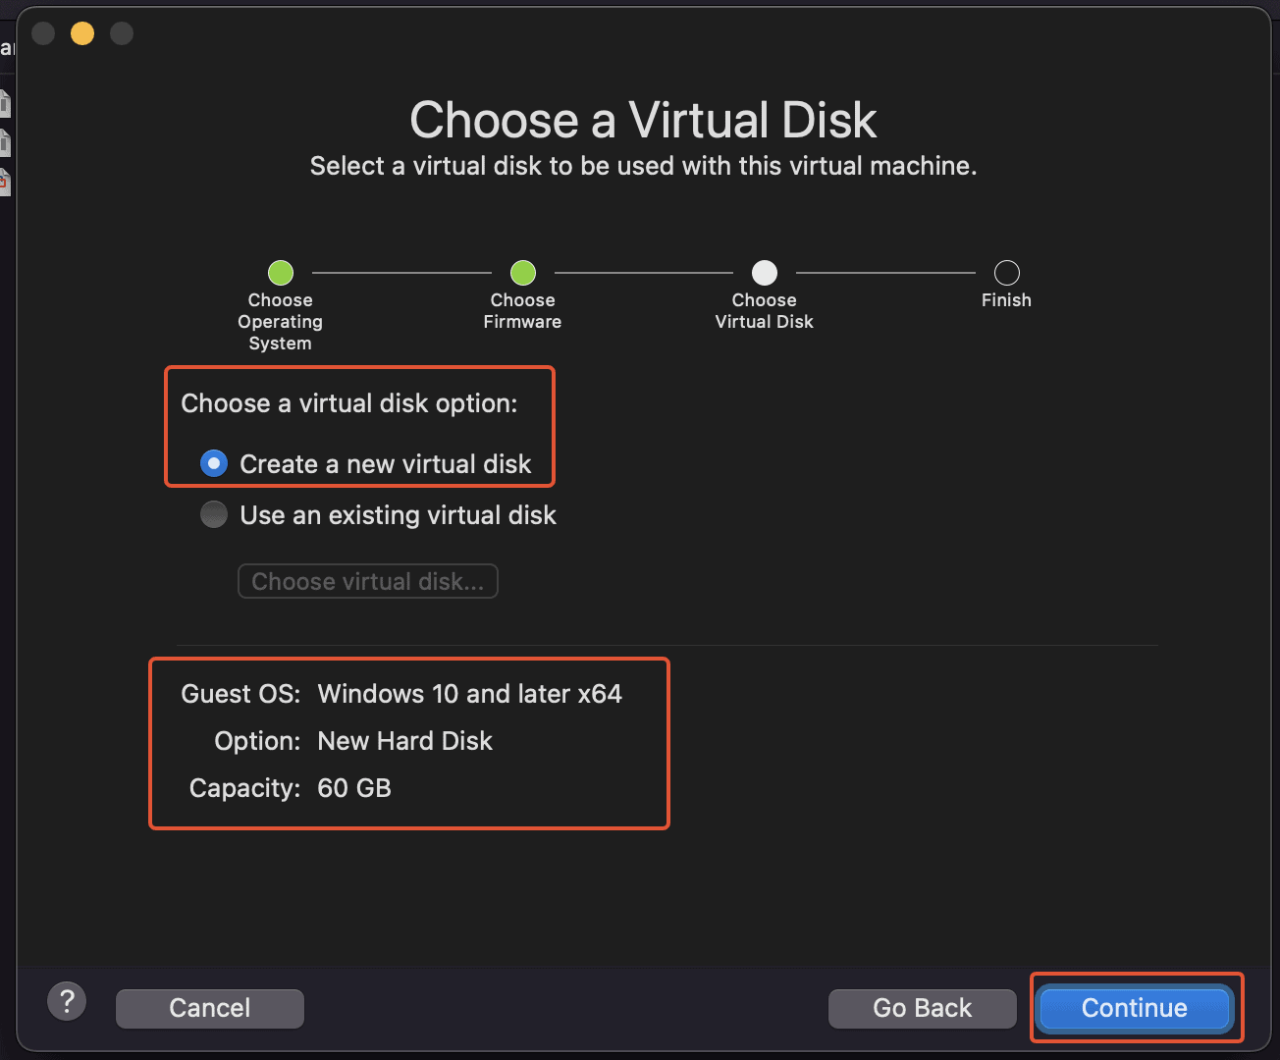 Select Virtual Disk to be Used in this Virtual Machine